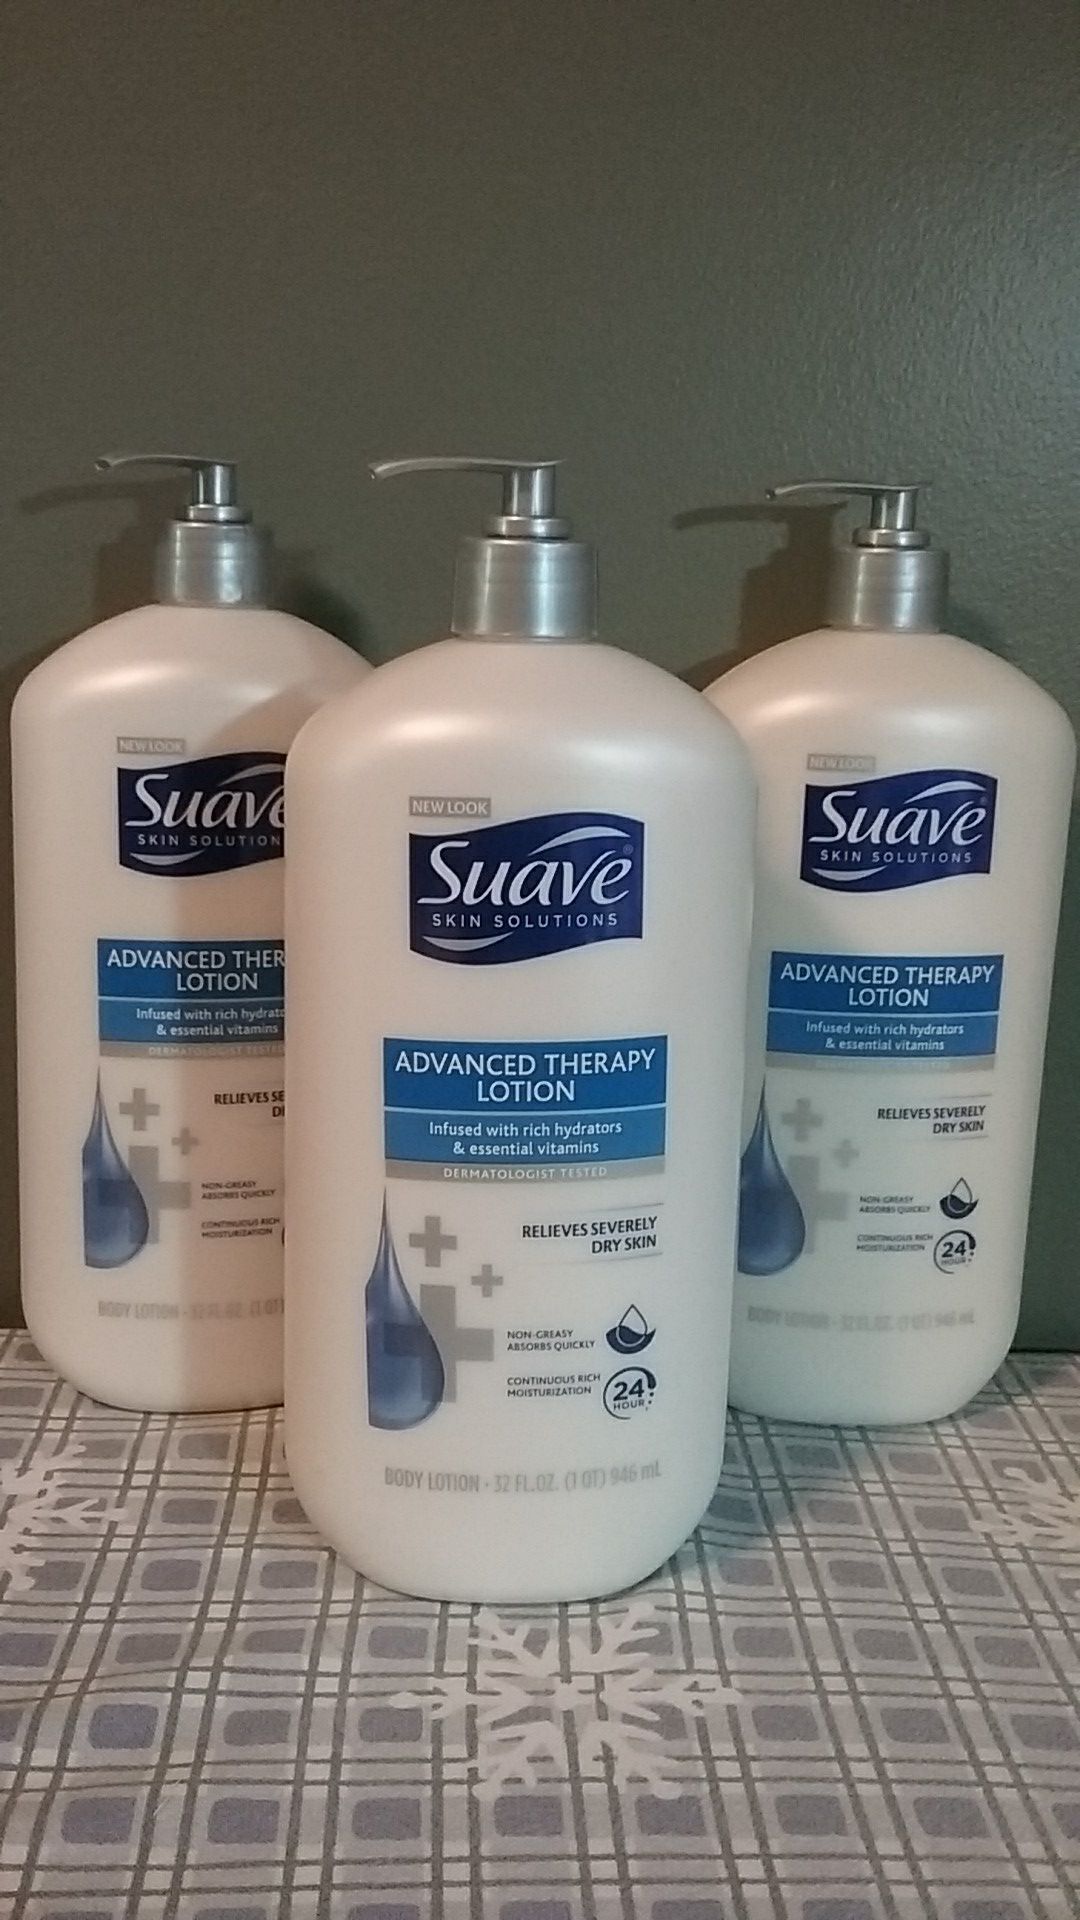 Suave advanced therapy lotion